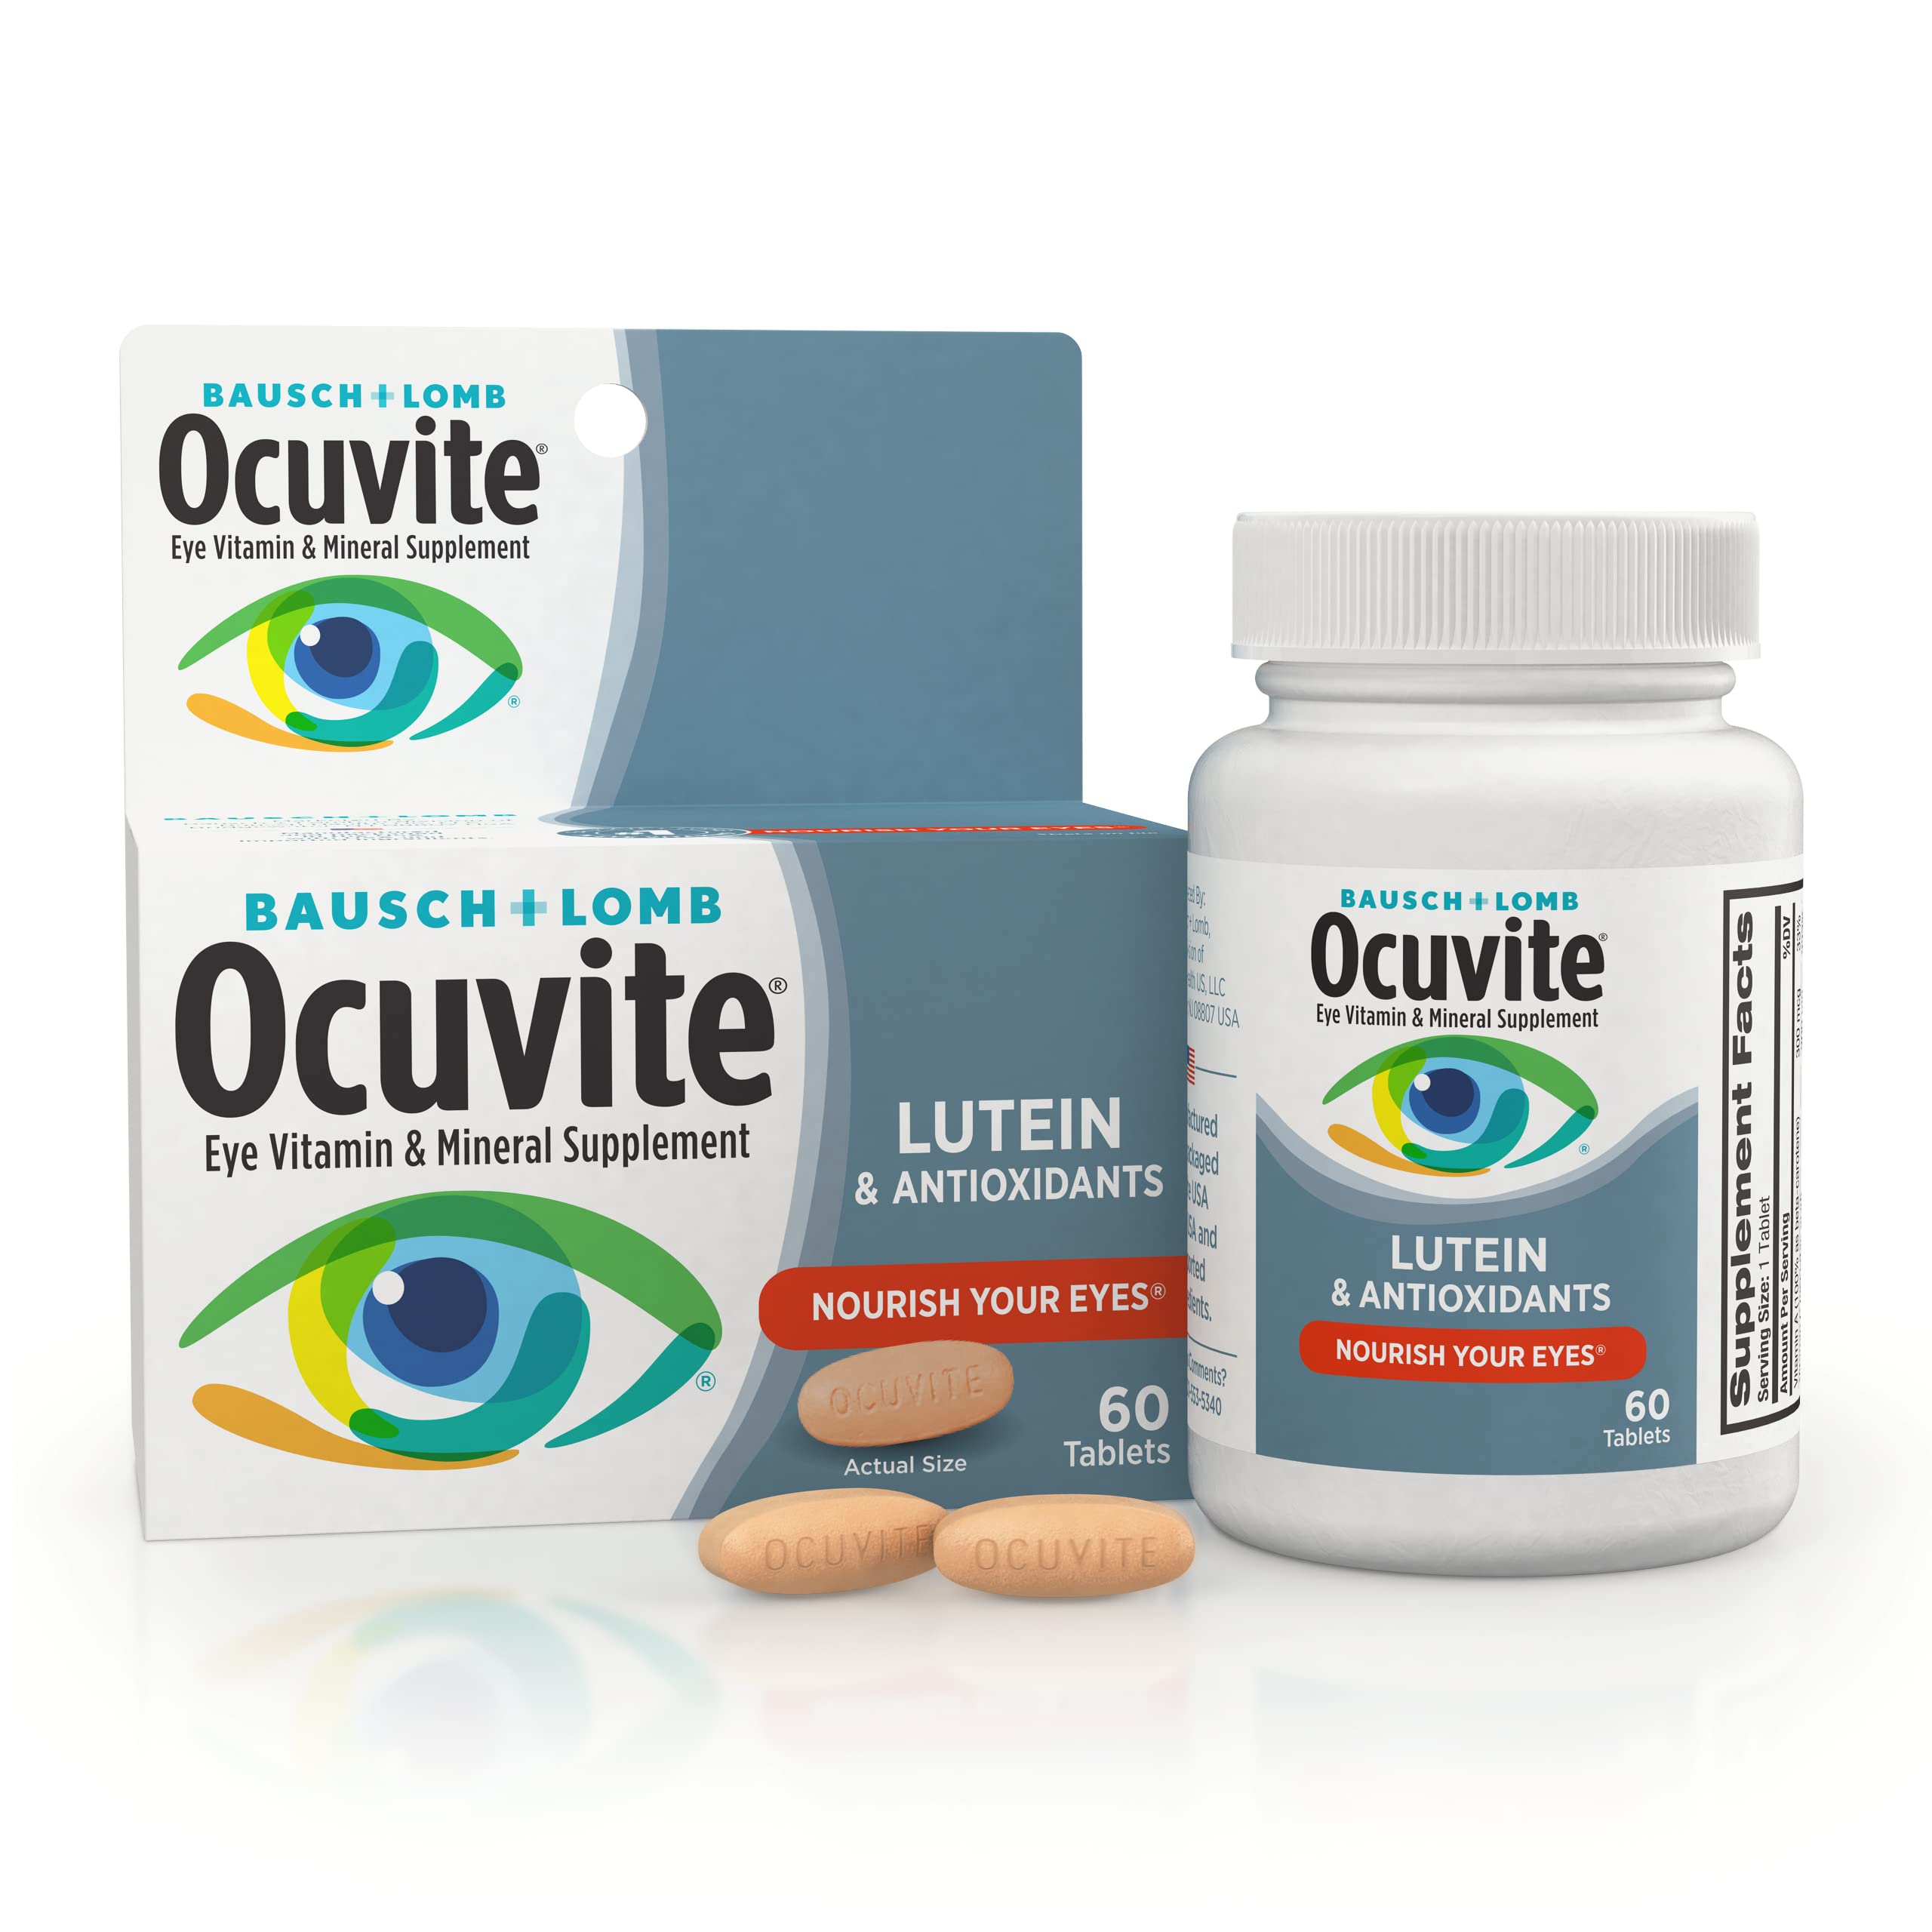 Bausch & Lomb Ocuvite Eye Vitamin & Mineral Supplement, Contains Zinc, Vitamins A, C, E, & Lutein, Pink,Tablet, 60 Count